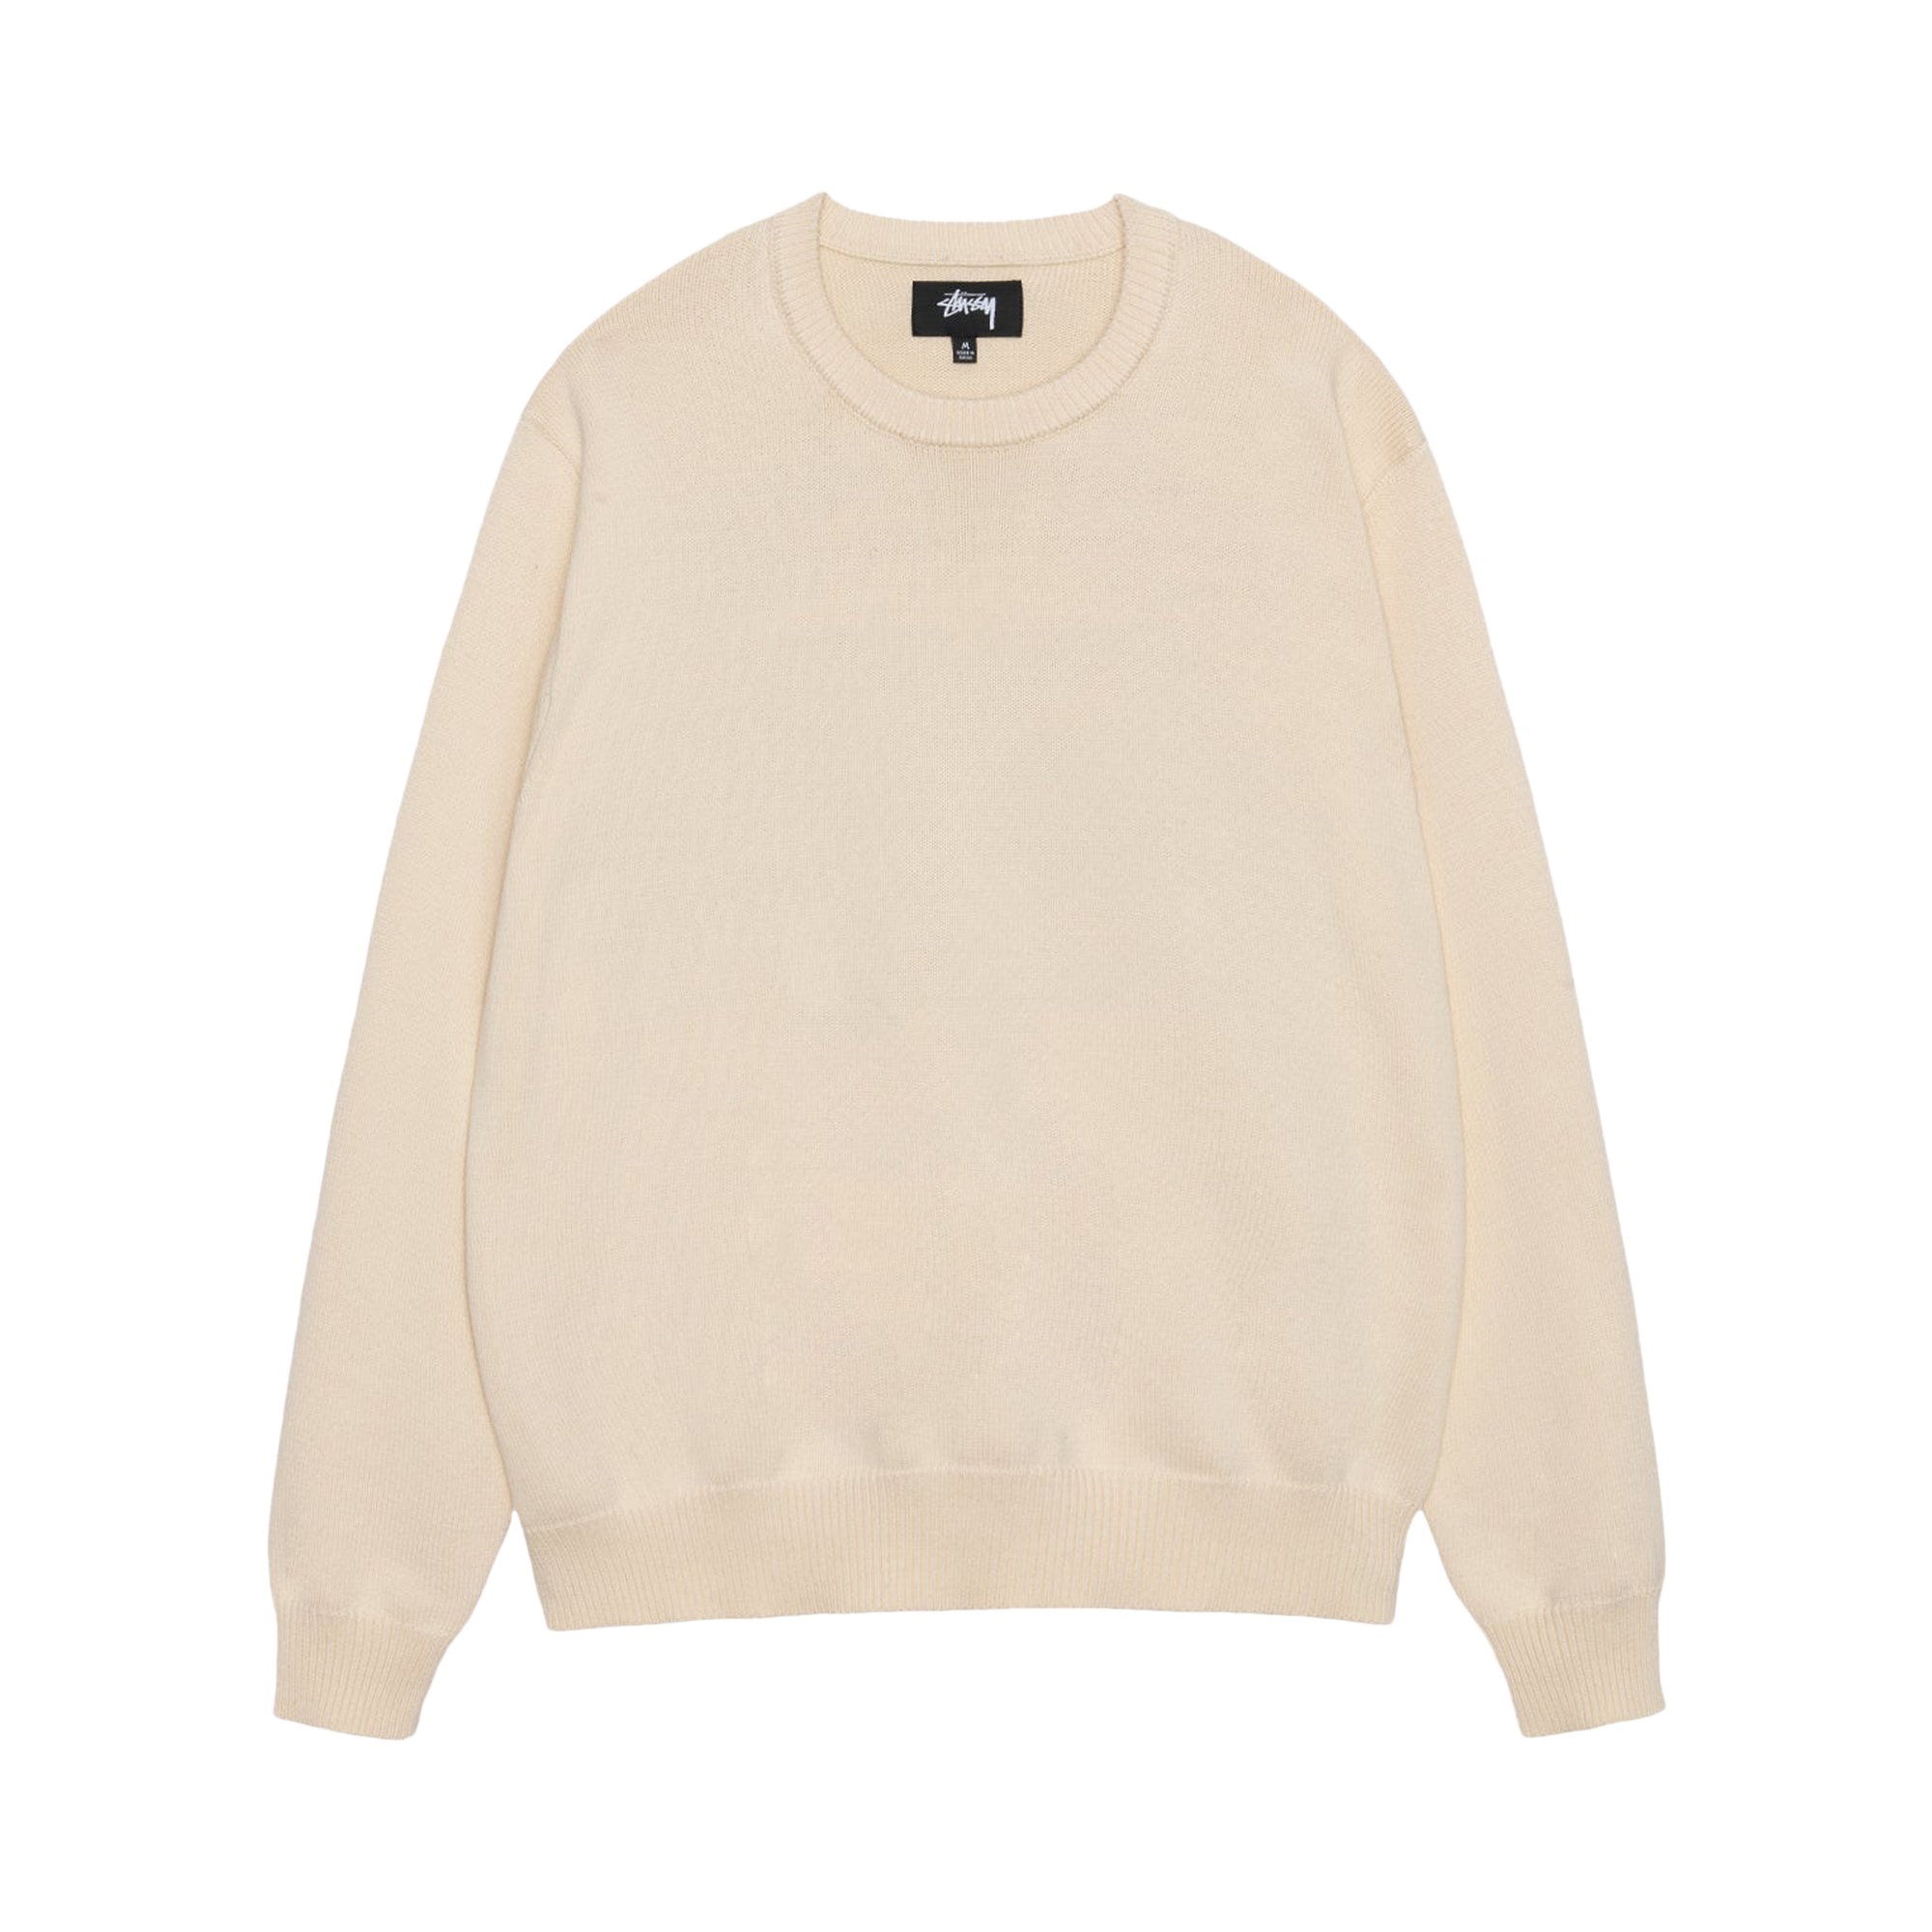 Buy Stussy Authentic Workgear Sweater 'Natural' - 117212 NATU